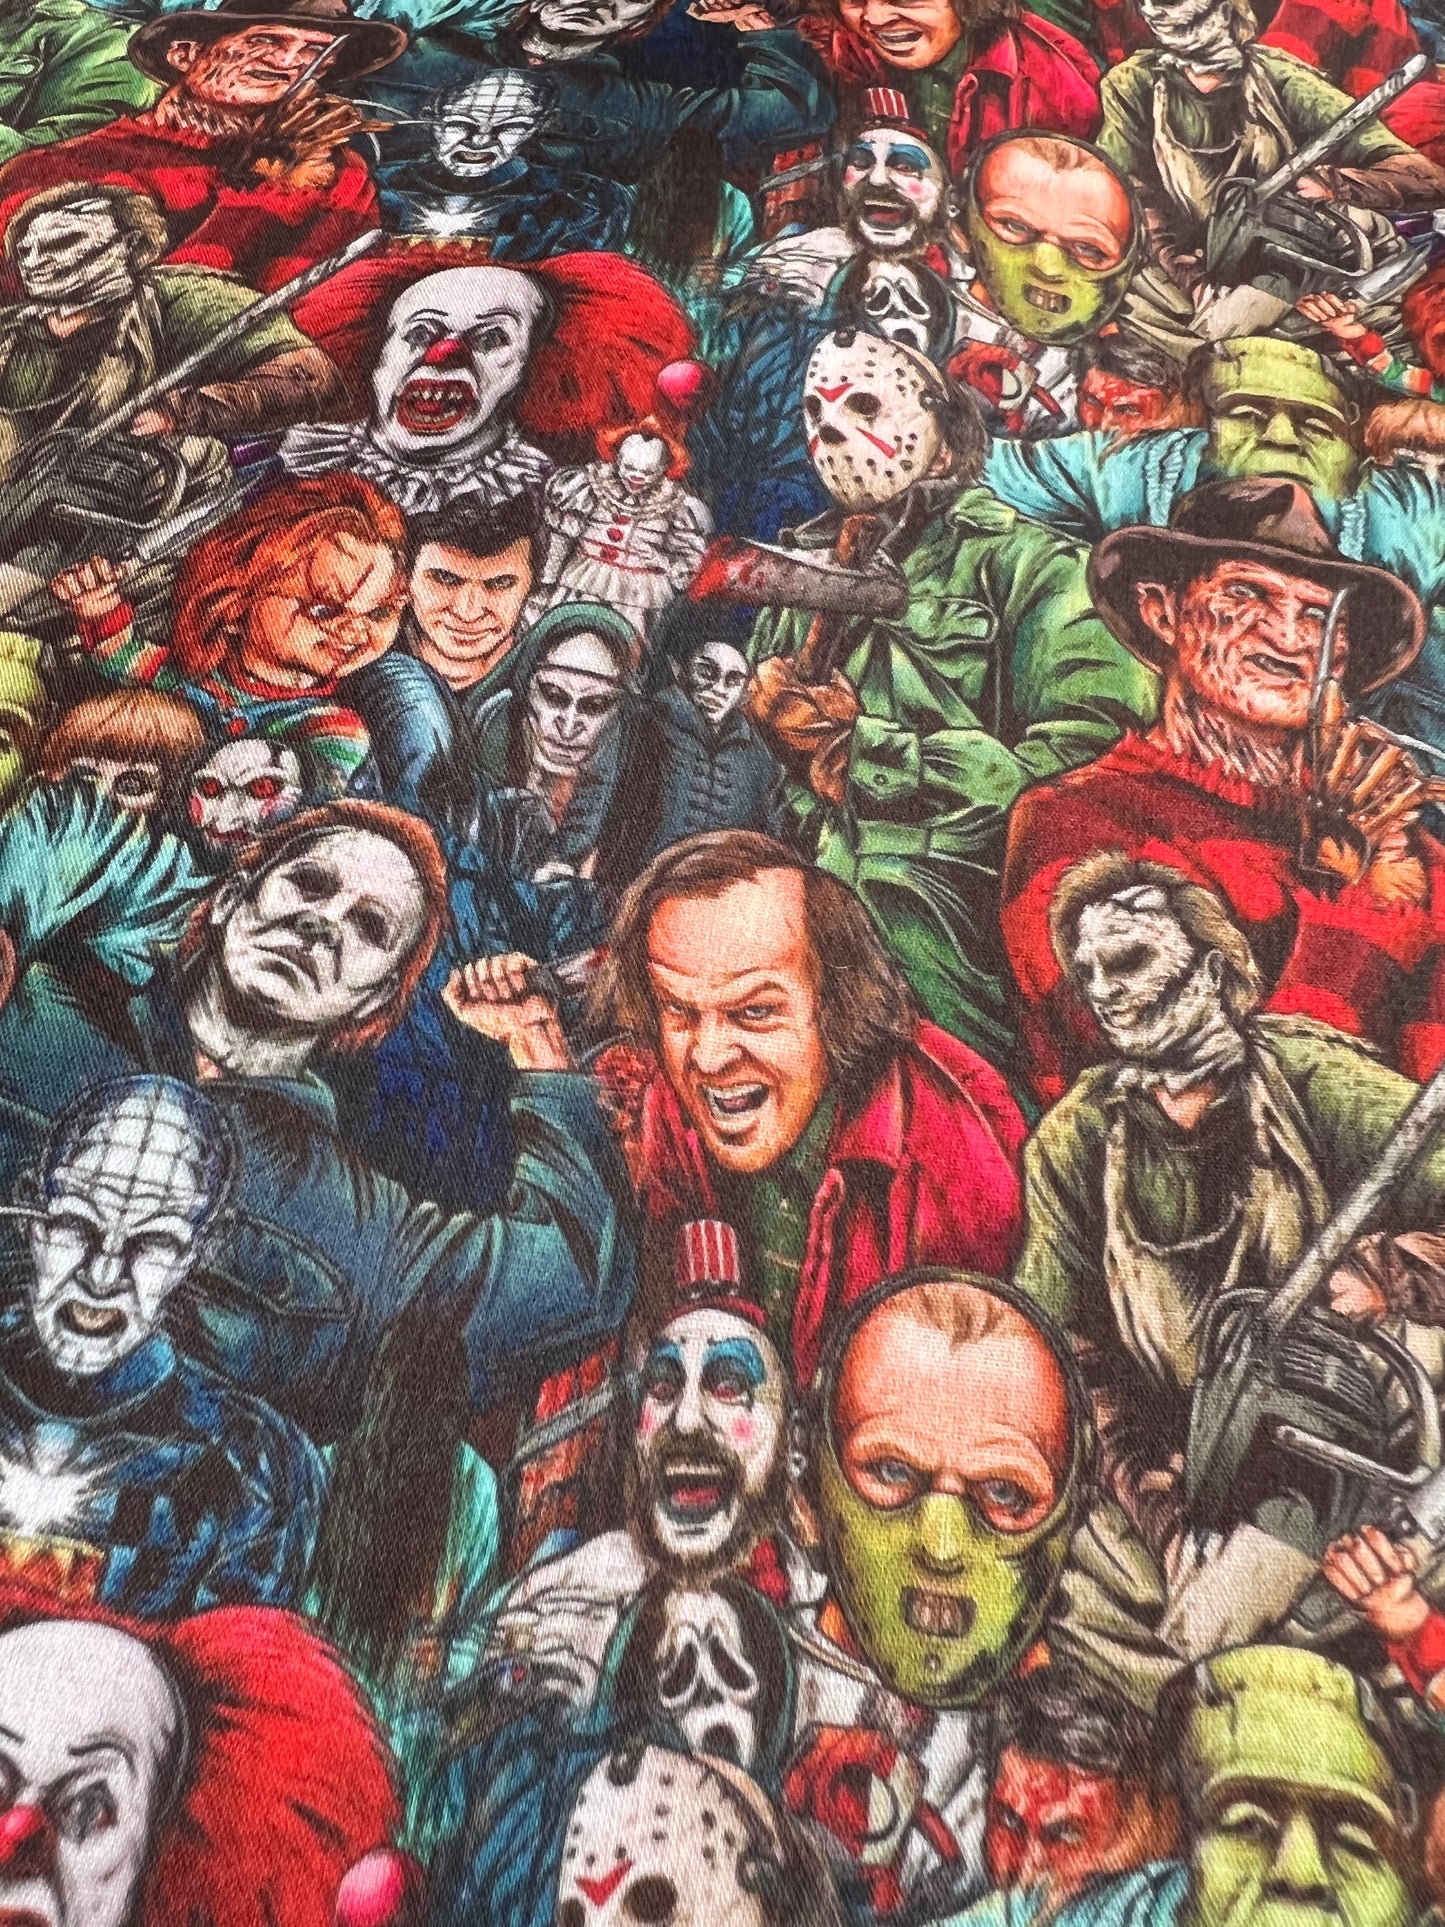 HORROR ICONS - Polycotton Fabric from Japan